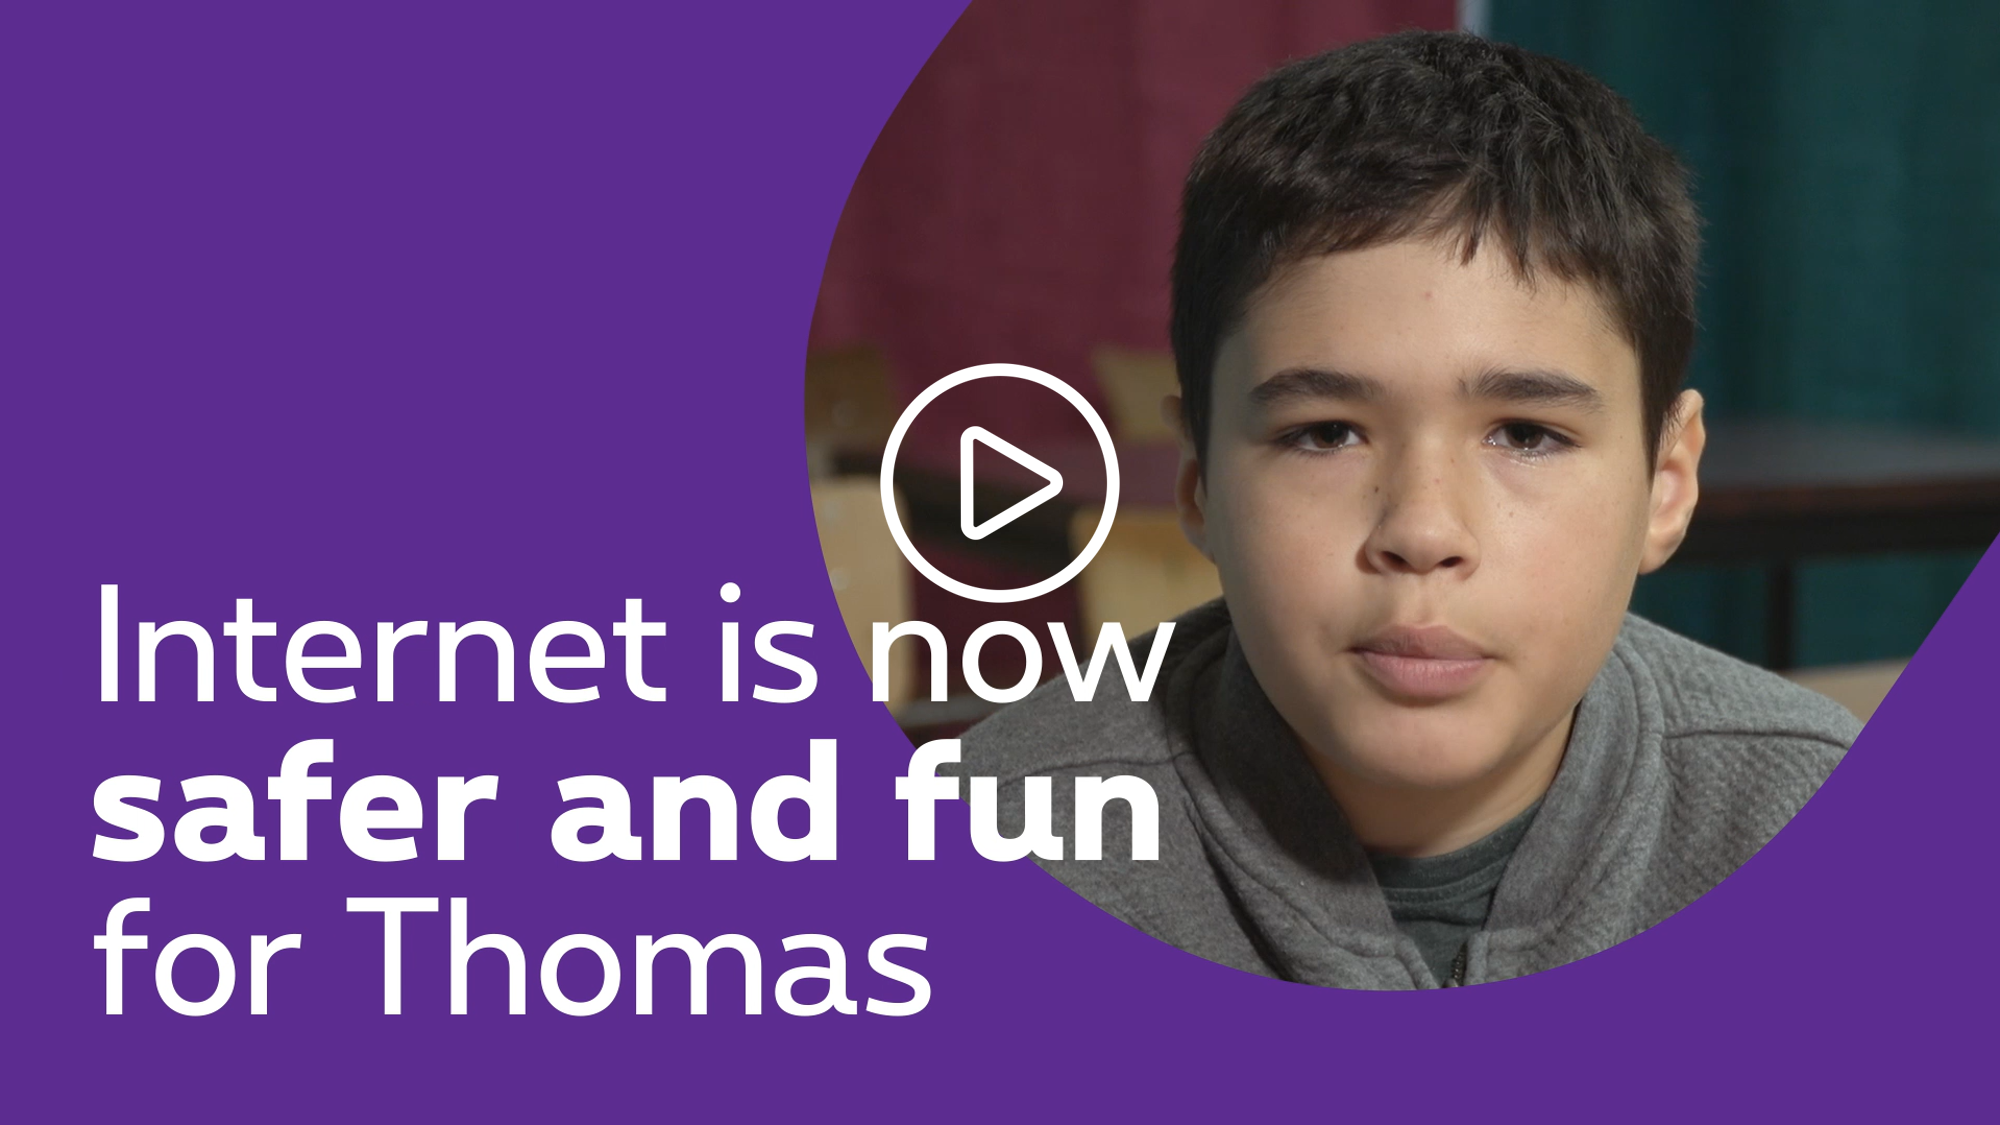 Internet is now safe and fun for Thomas - click to discover the video